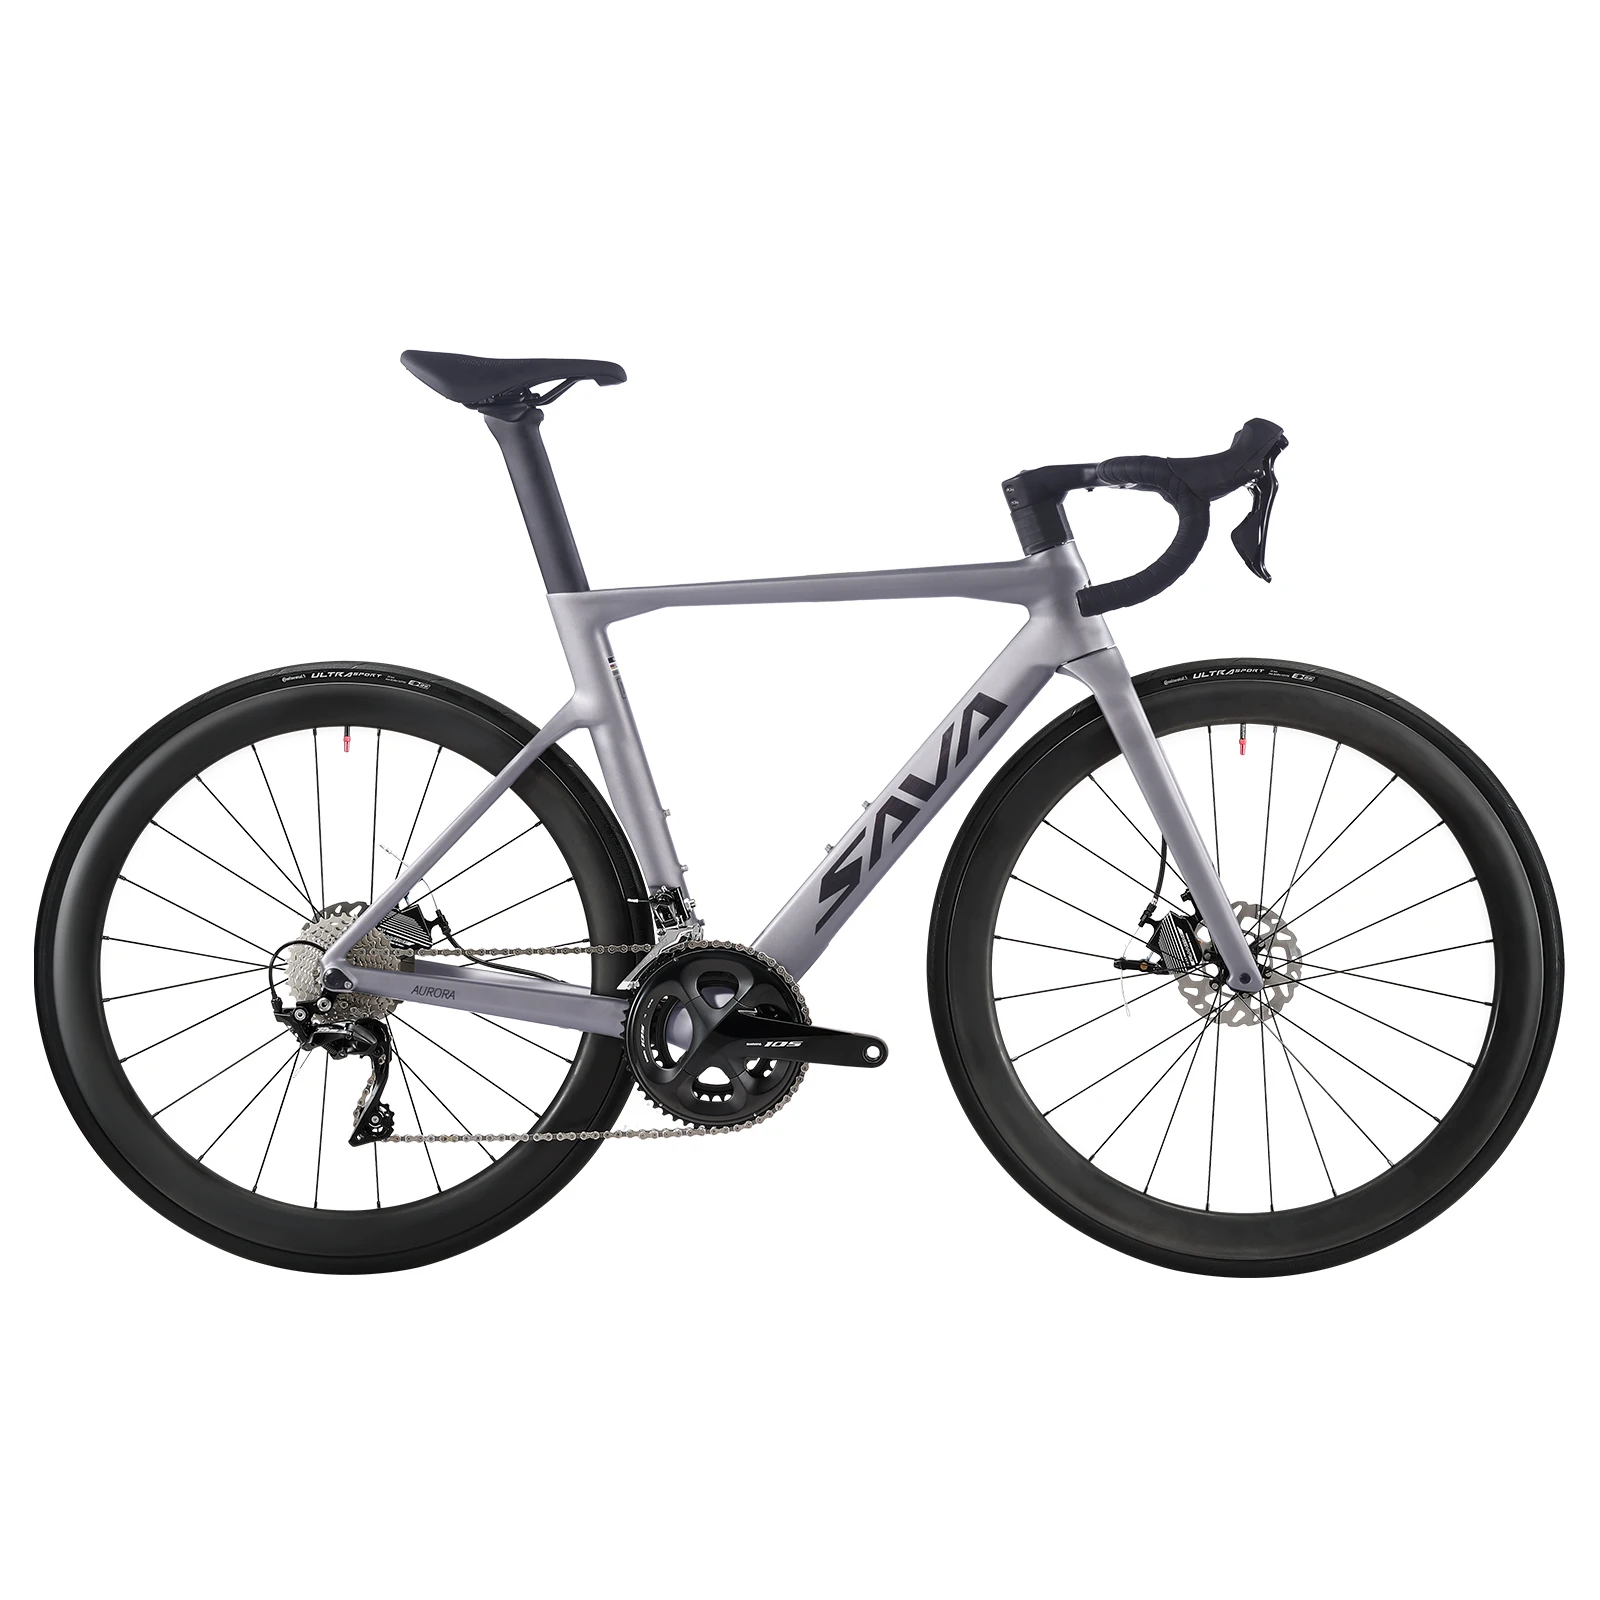 

SAVA A7 PRO Carbon Fibre Road Bike Carbon Frame/Wheels/Handlebar Complete Bicycle with SHIMANO 105 R7000 22 Speeds Group Sets